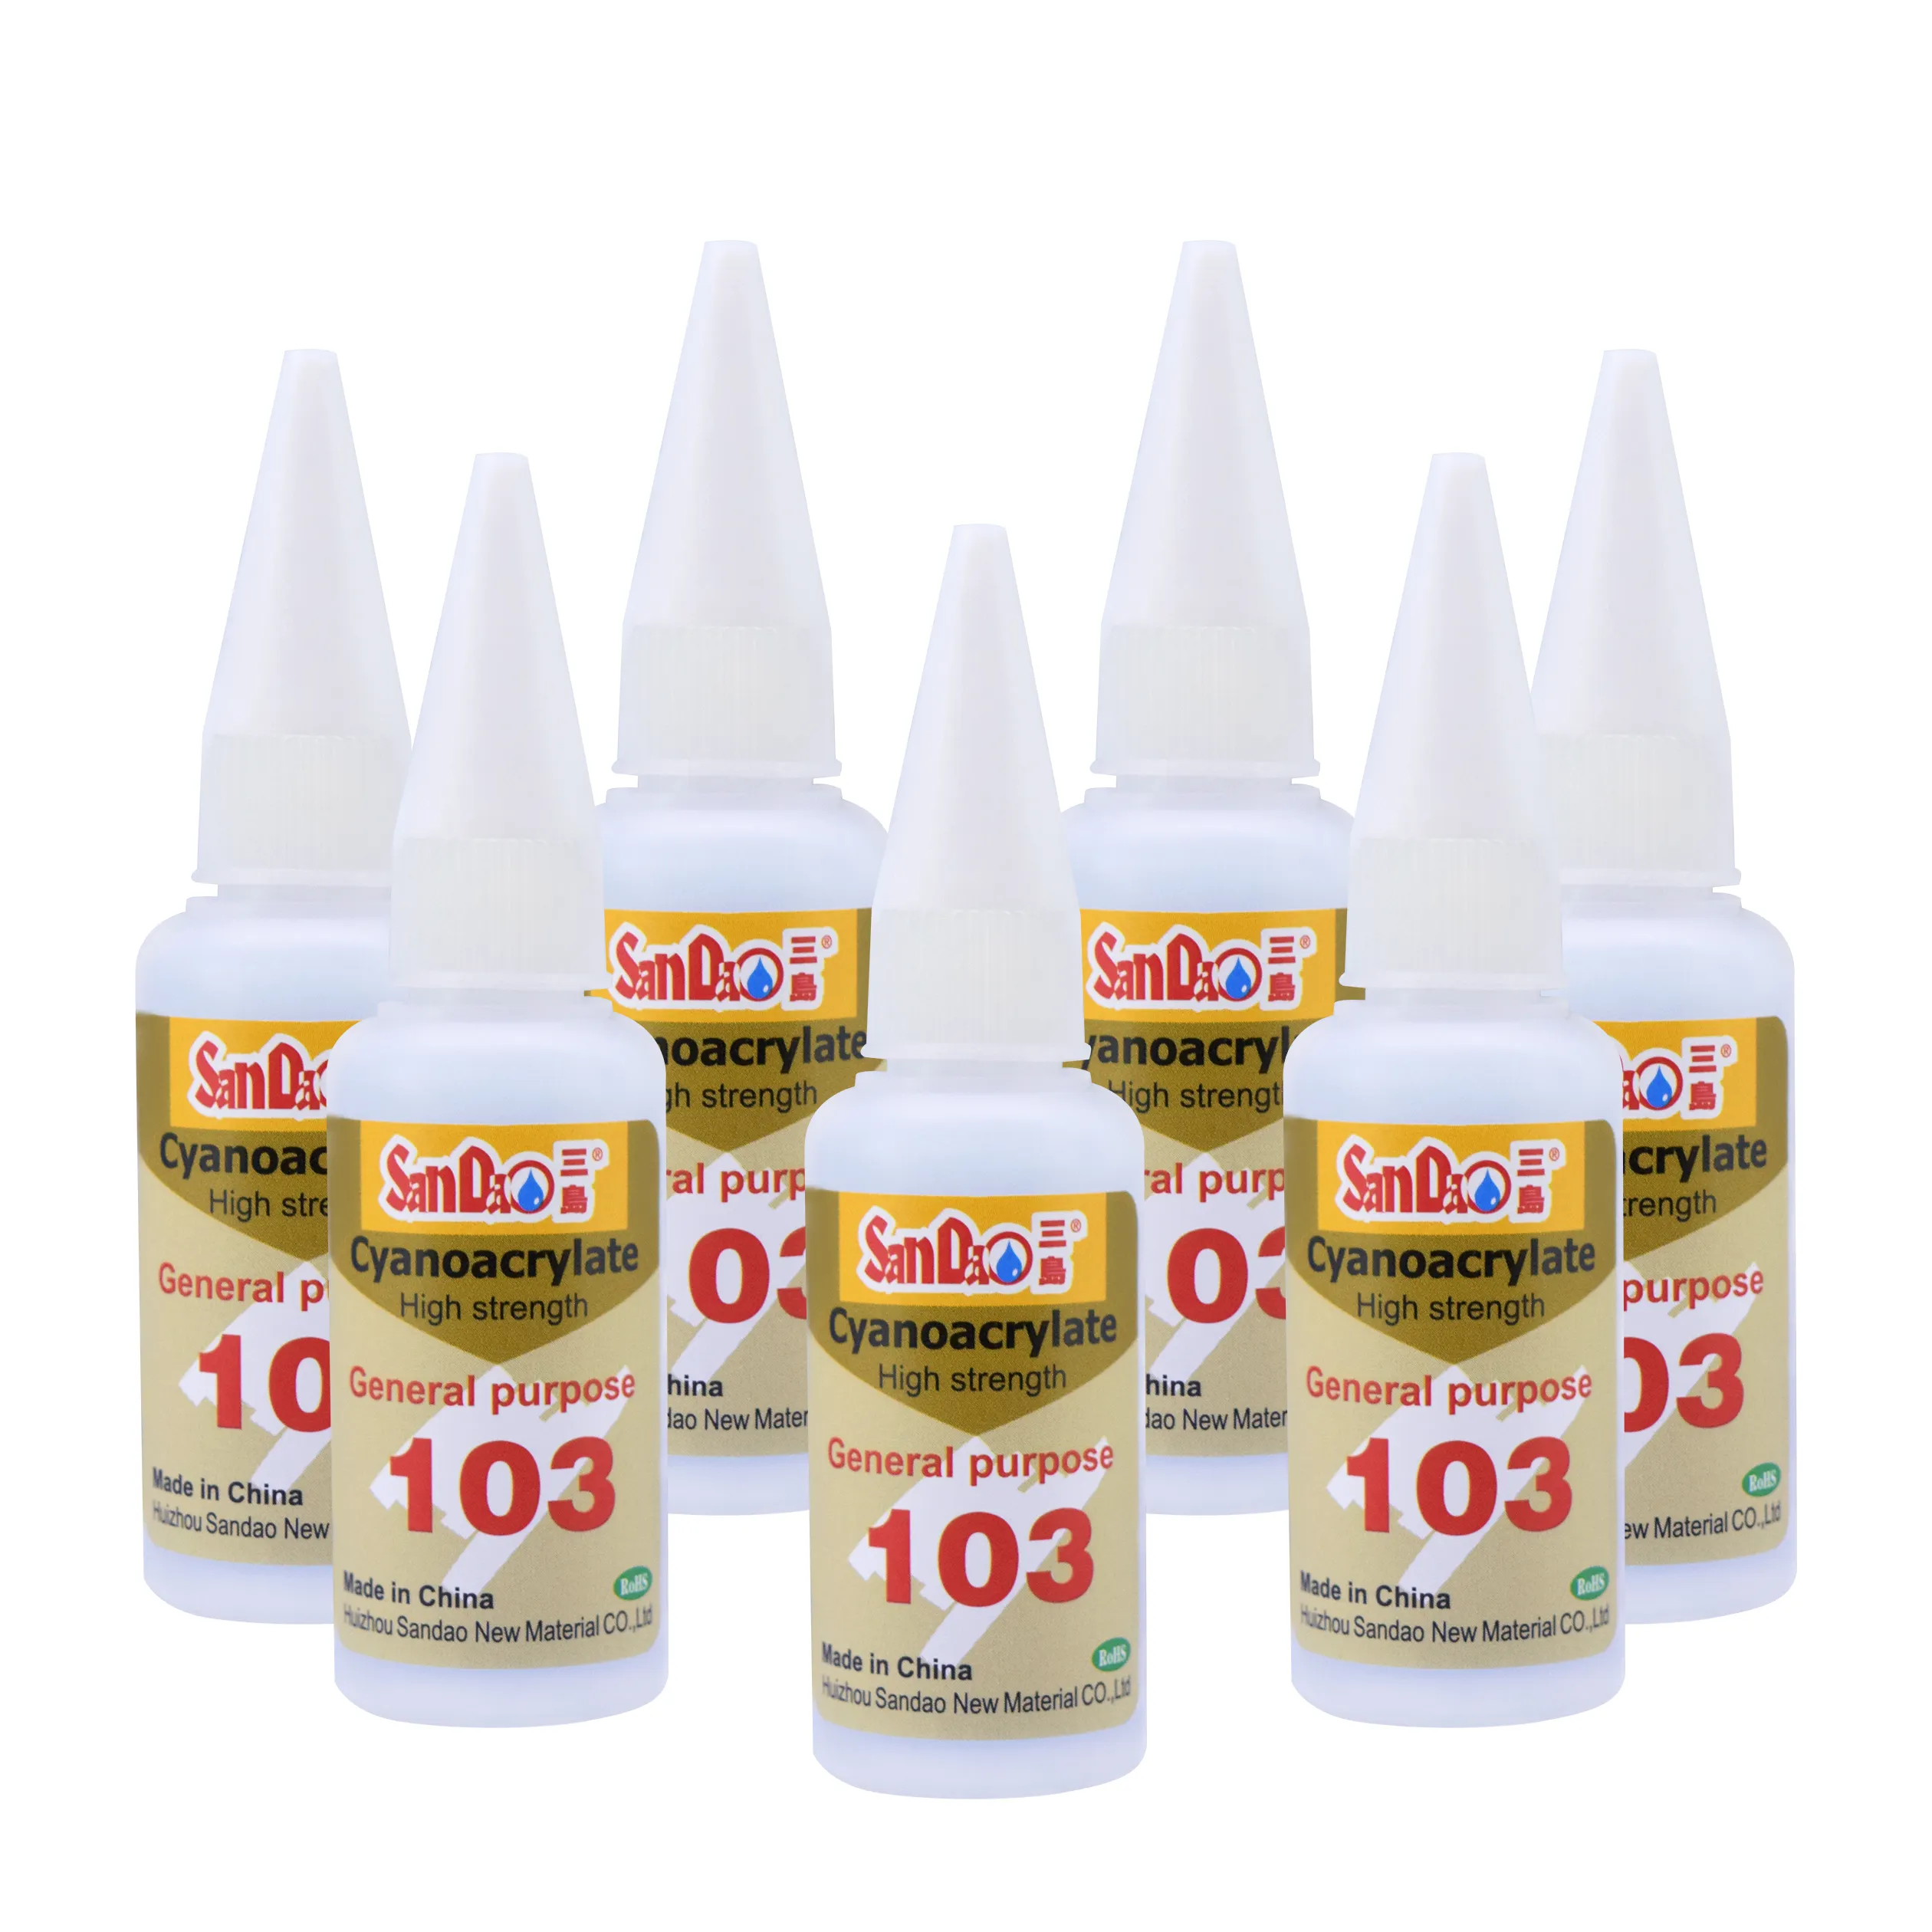 SD401A cyanoacrylate adhesive super glue 5 seconds fast curing